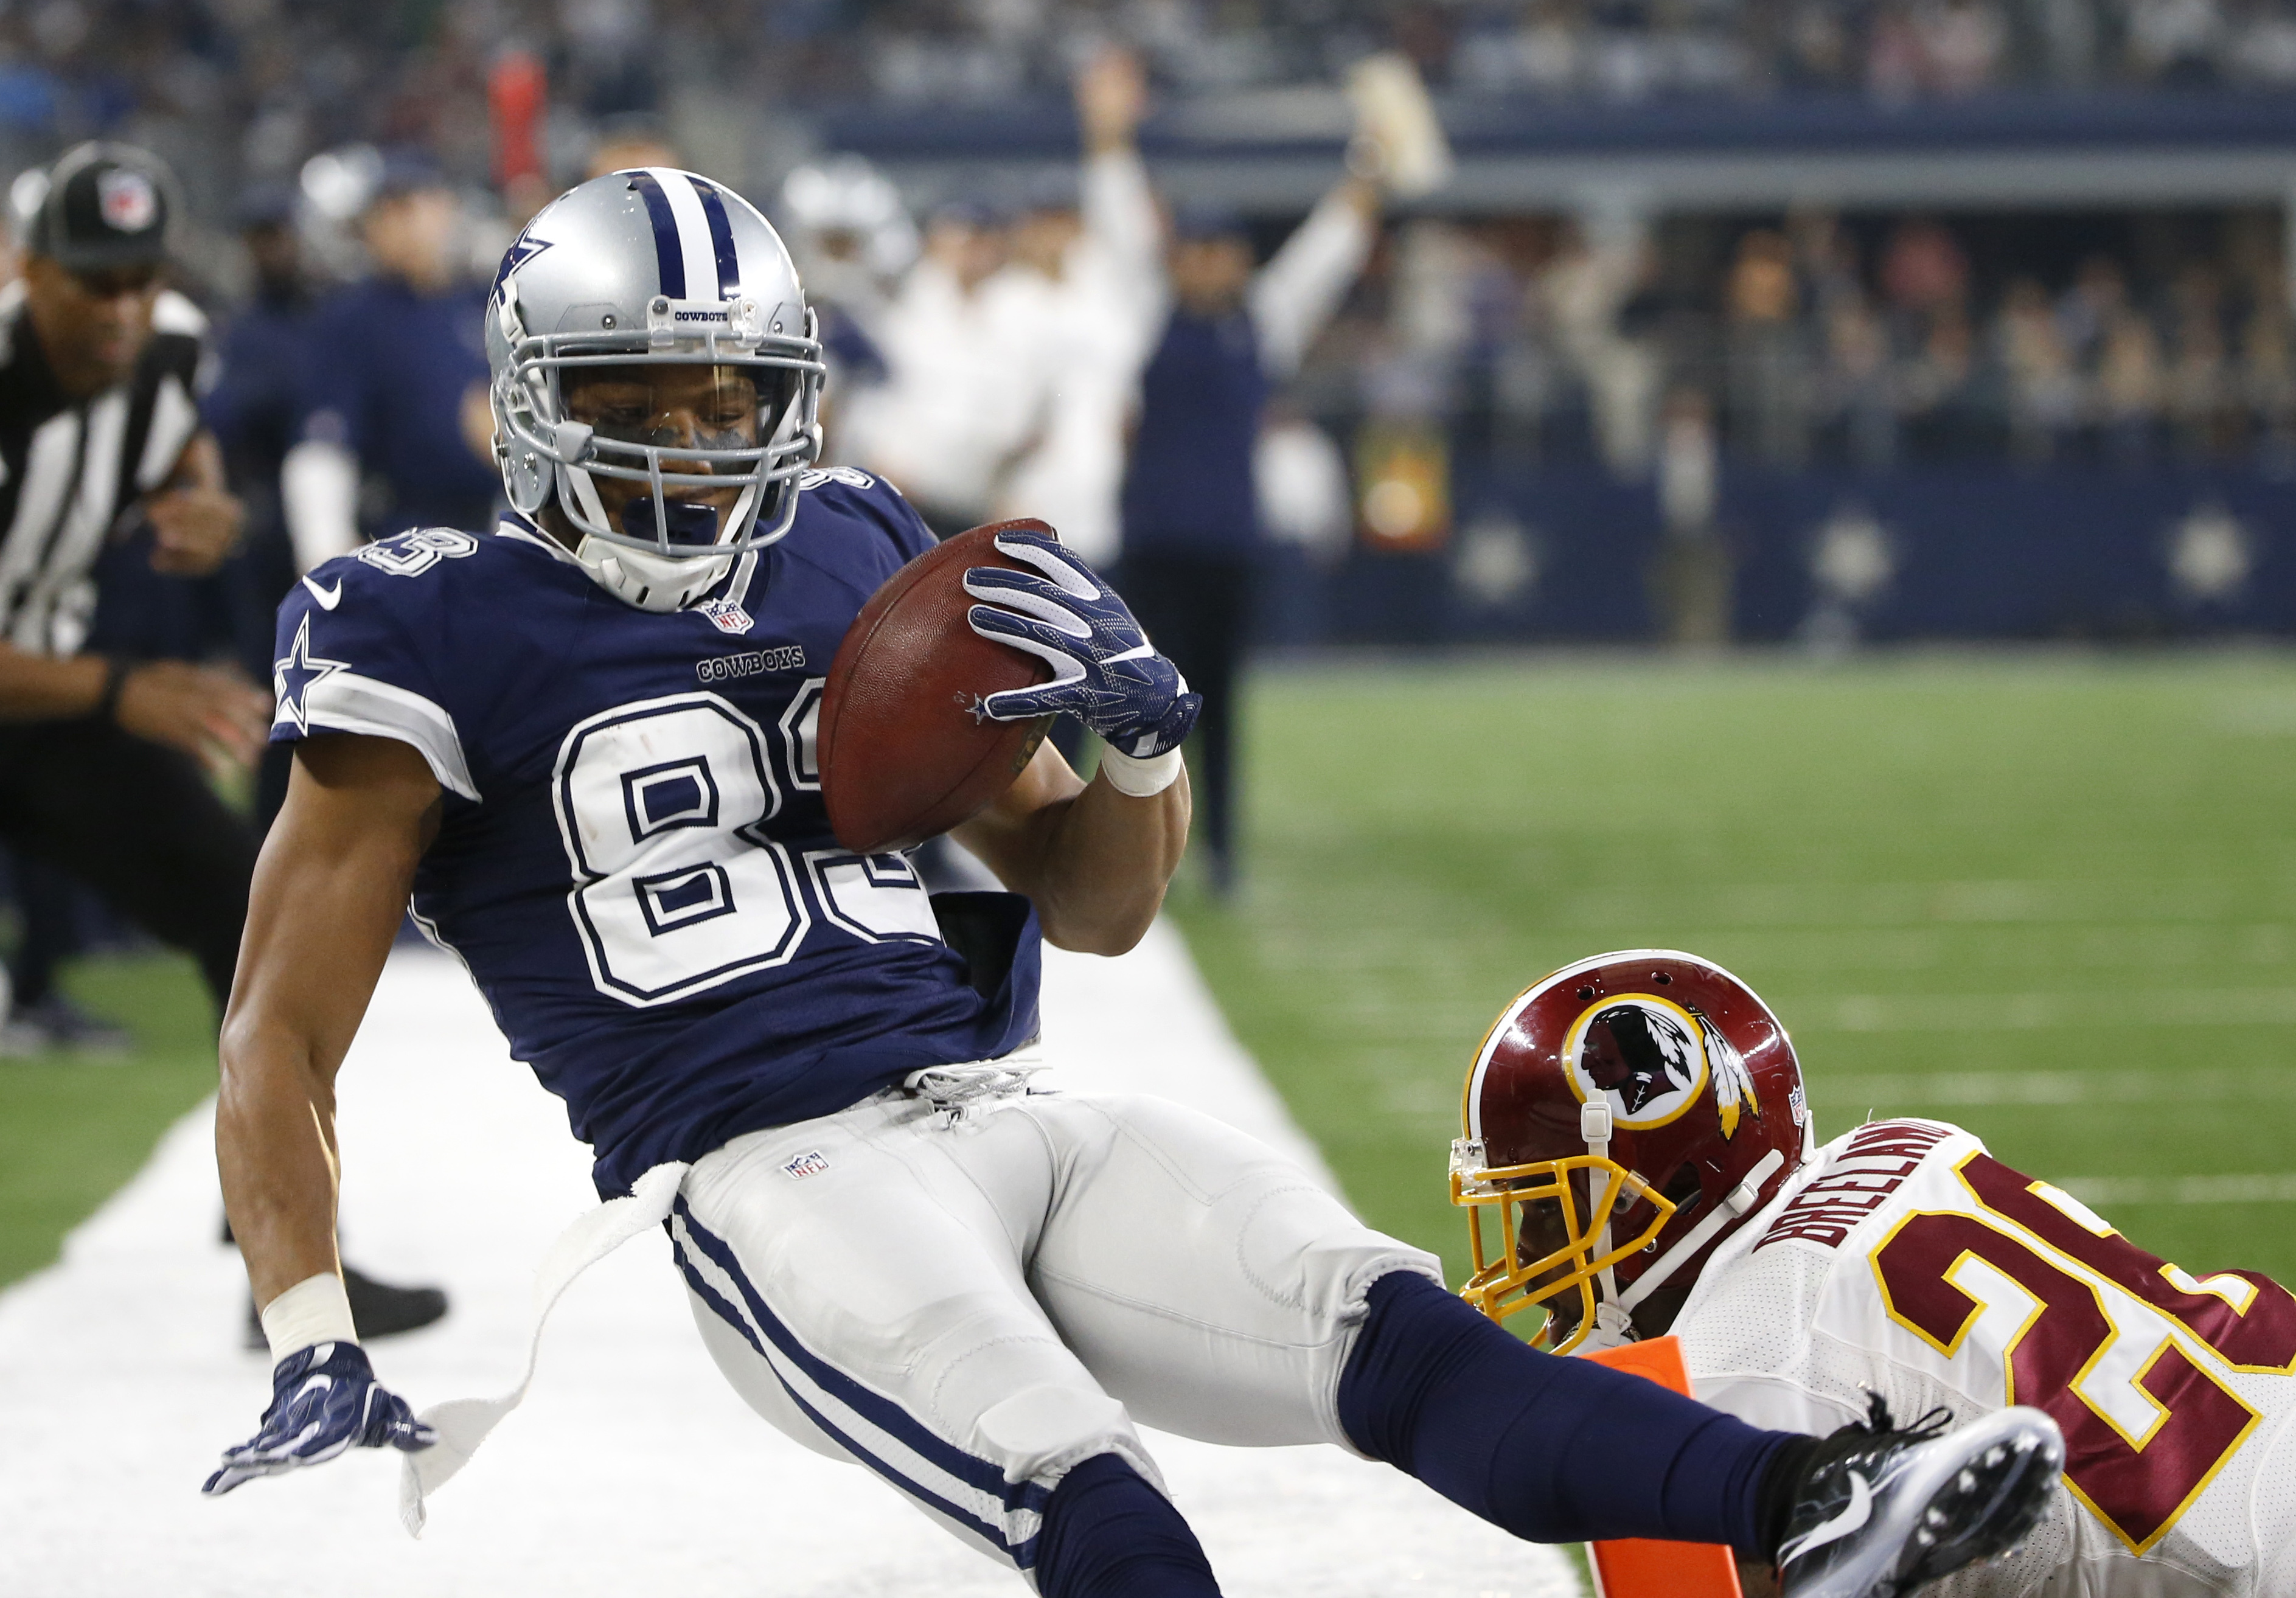 Dallas Cowboys wide receiver Terrance Williams (83) is pushed out of the end zone by Washington Redskins' Bashaud Breeland (26) after Williams caught a pass for a touchdown during the first half of an NFL football game, Thursday, Nov. 24, 2016, in Arlington, Texas. (AP Photo/Ron Jenkins)